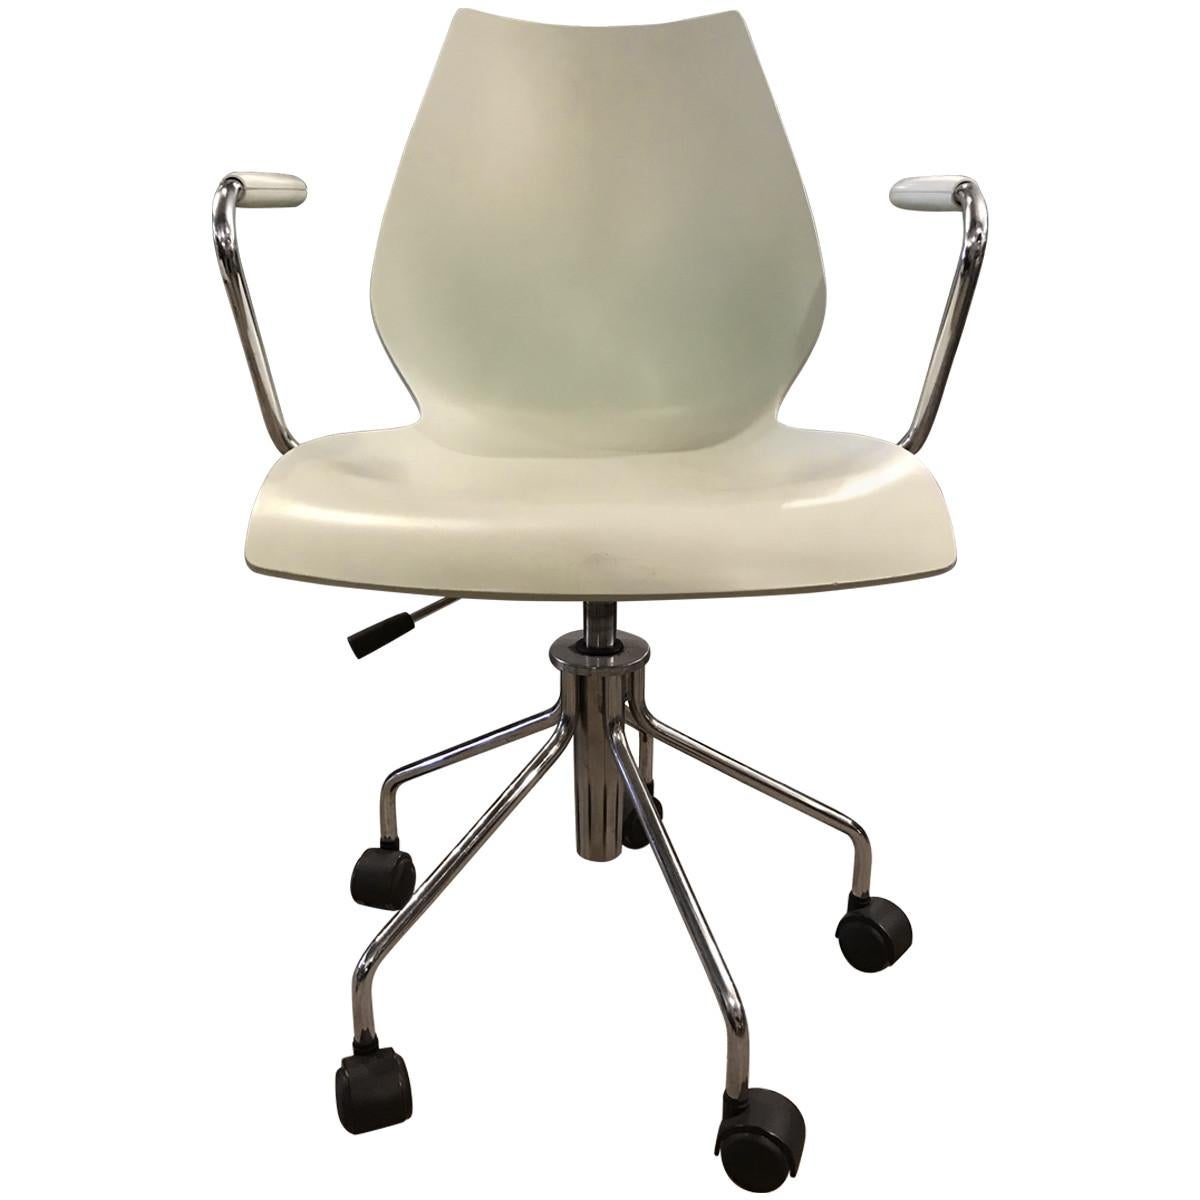 These Maui desk chairs feature a smooth pale blue batched-dyed polypropylene shell, set in an adjustable height frame made of tubular chrome-plated steel. Finished with armrests. and casters, these chairs are as functional as they are refined. Sold